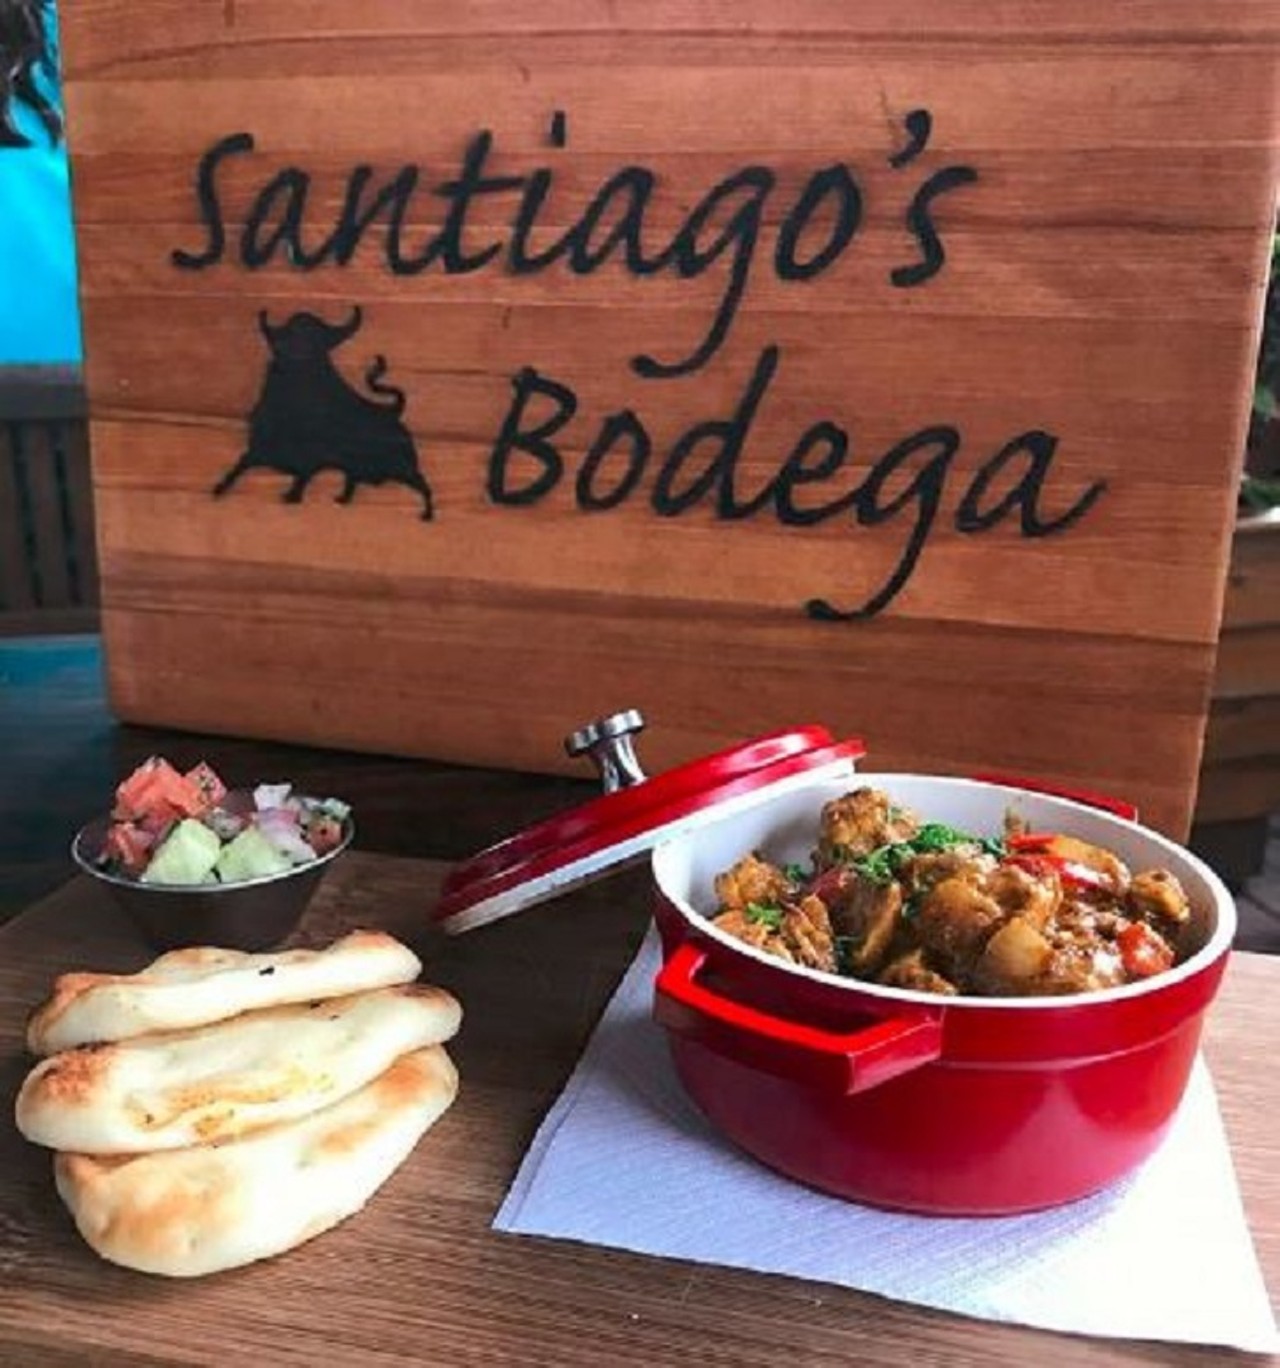 Santiago&#146;s Bodega
Locations: Orlando, Altamonte Springs, Key West
Founded in Key West and named after the protagonist of Hemingway&#146;s &#147;The Old Man and the Sea,&#148; Santiago&#146;s Bodega is a tapas-style restaurant dedicated to throwing customers a party every evening.
Photo via Santiago&#146;s Bodega Orlando/Facebook